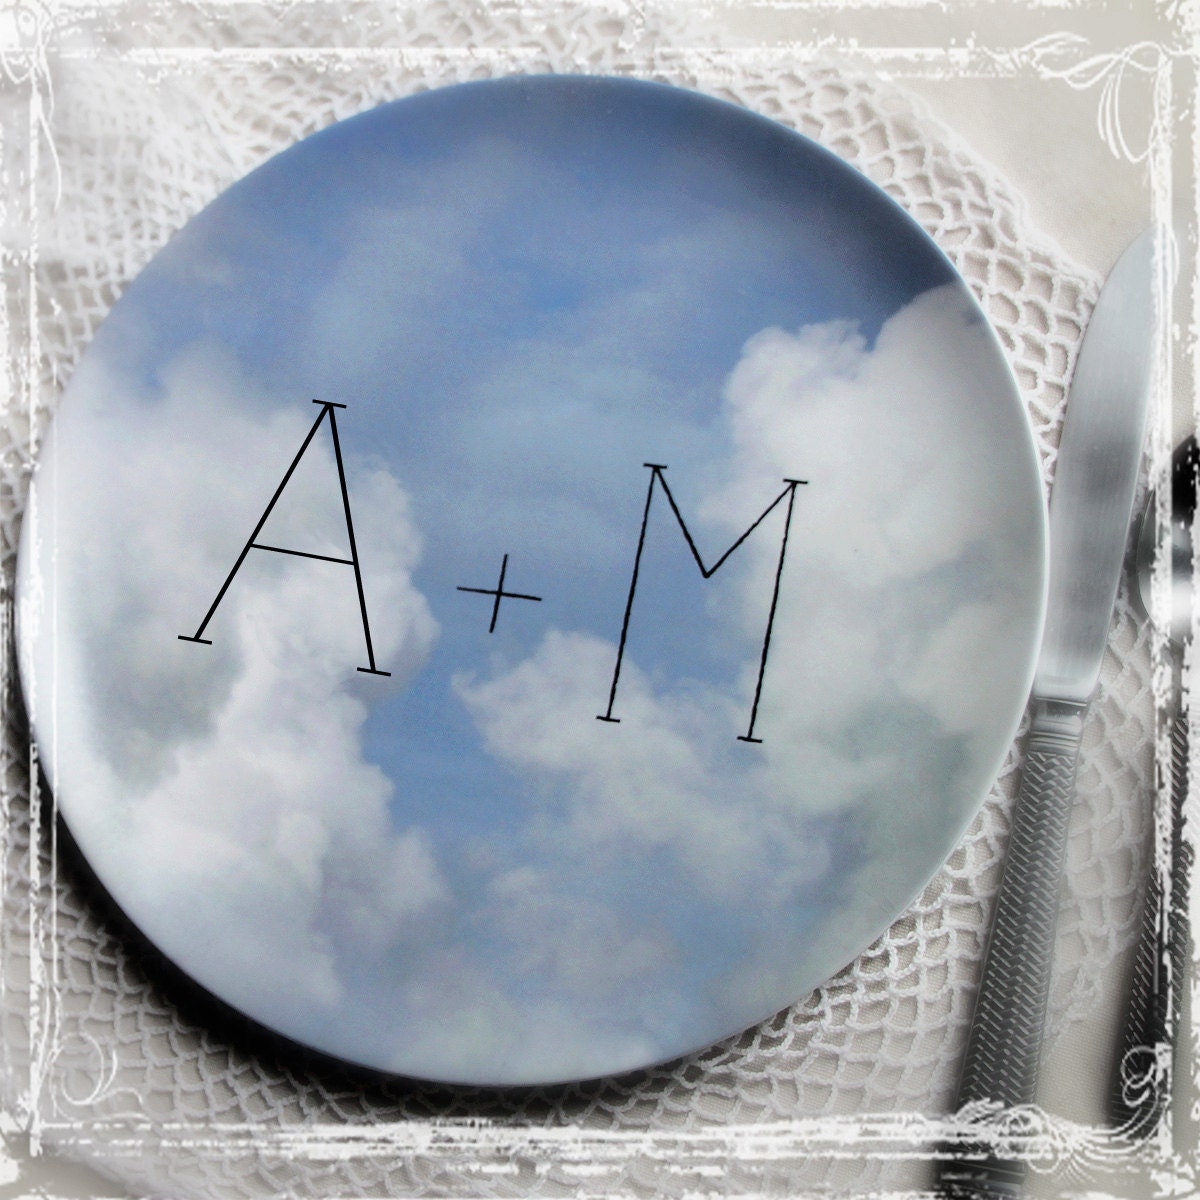 Match Made In Heaven Plate - Weddings Anniversary, First Married Christmas Gift, Personalized, Sky Clouds, Reception, Photo Prop Newlywed